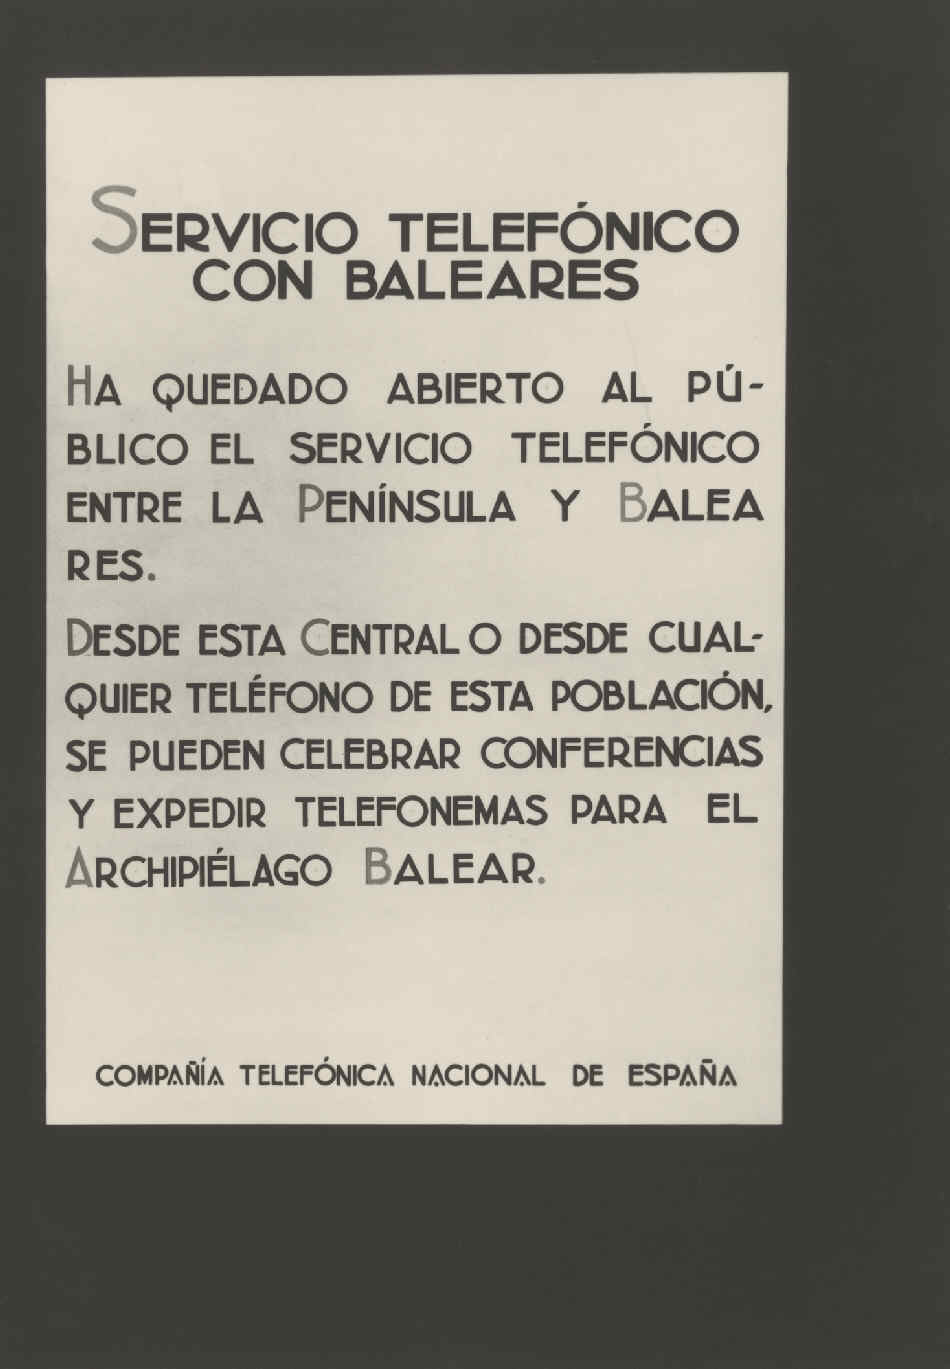 Announcement of the opening of the Balearic Islands telephone service.